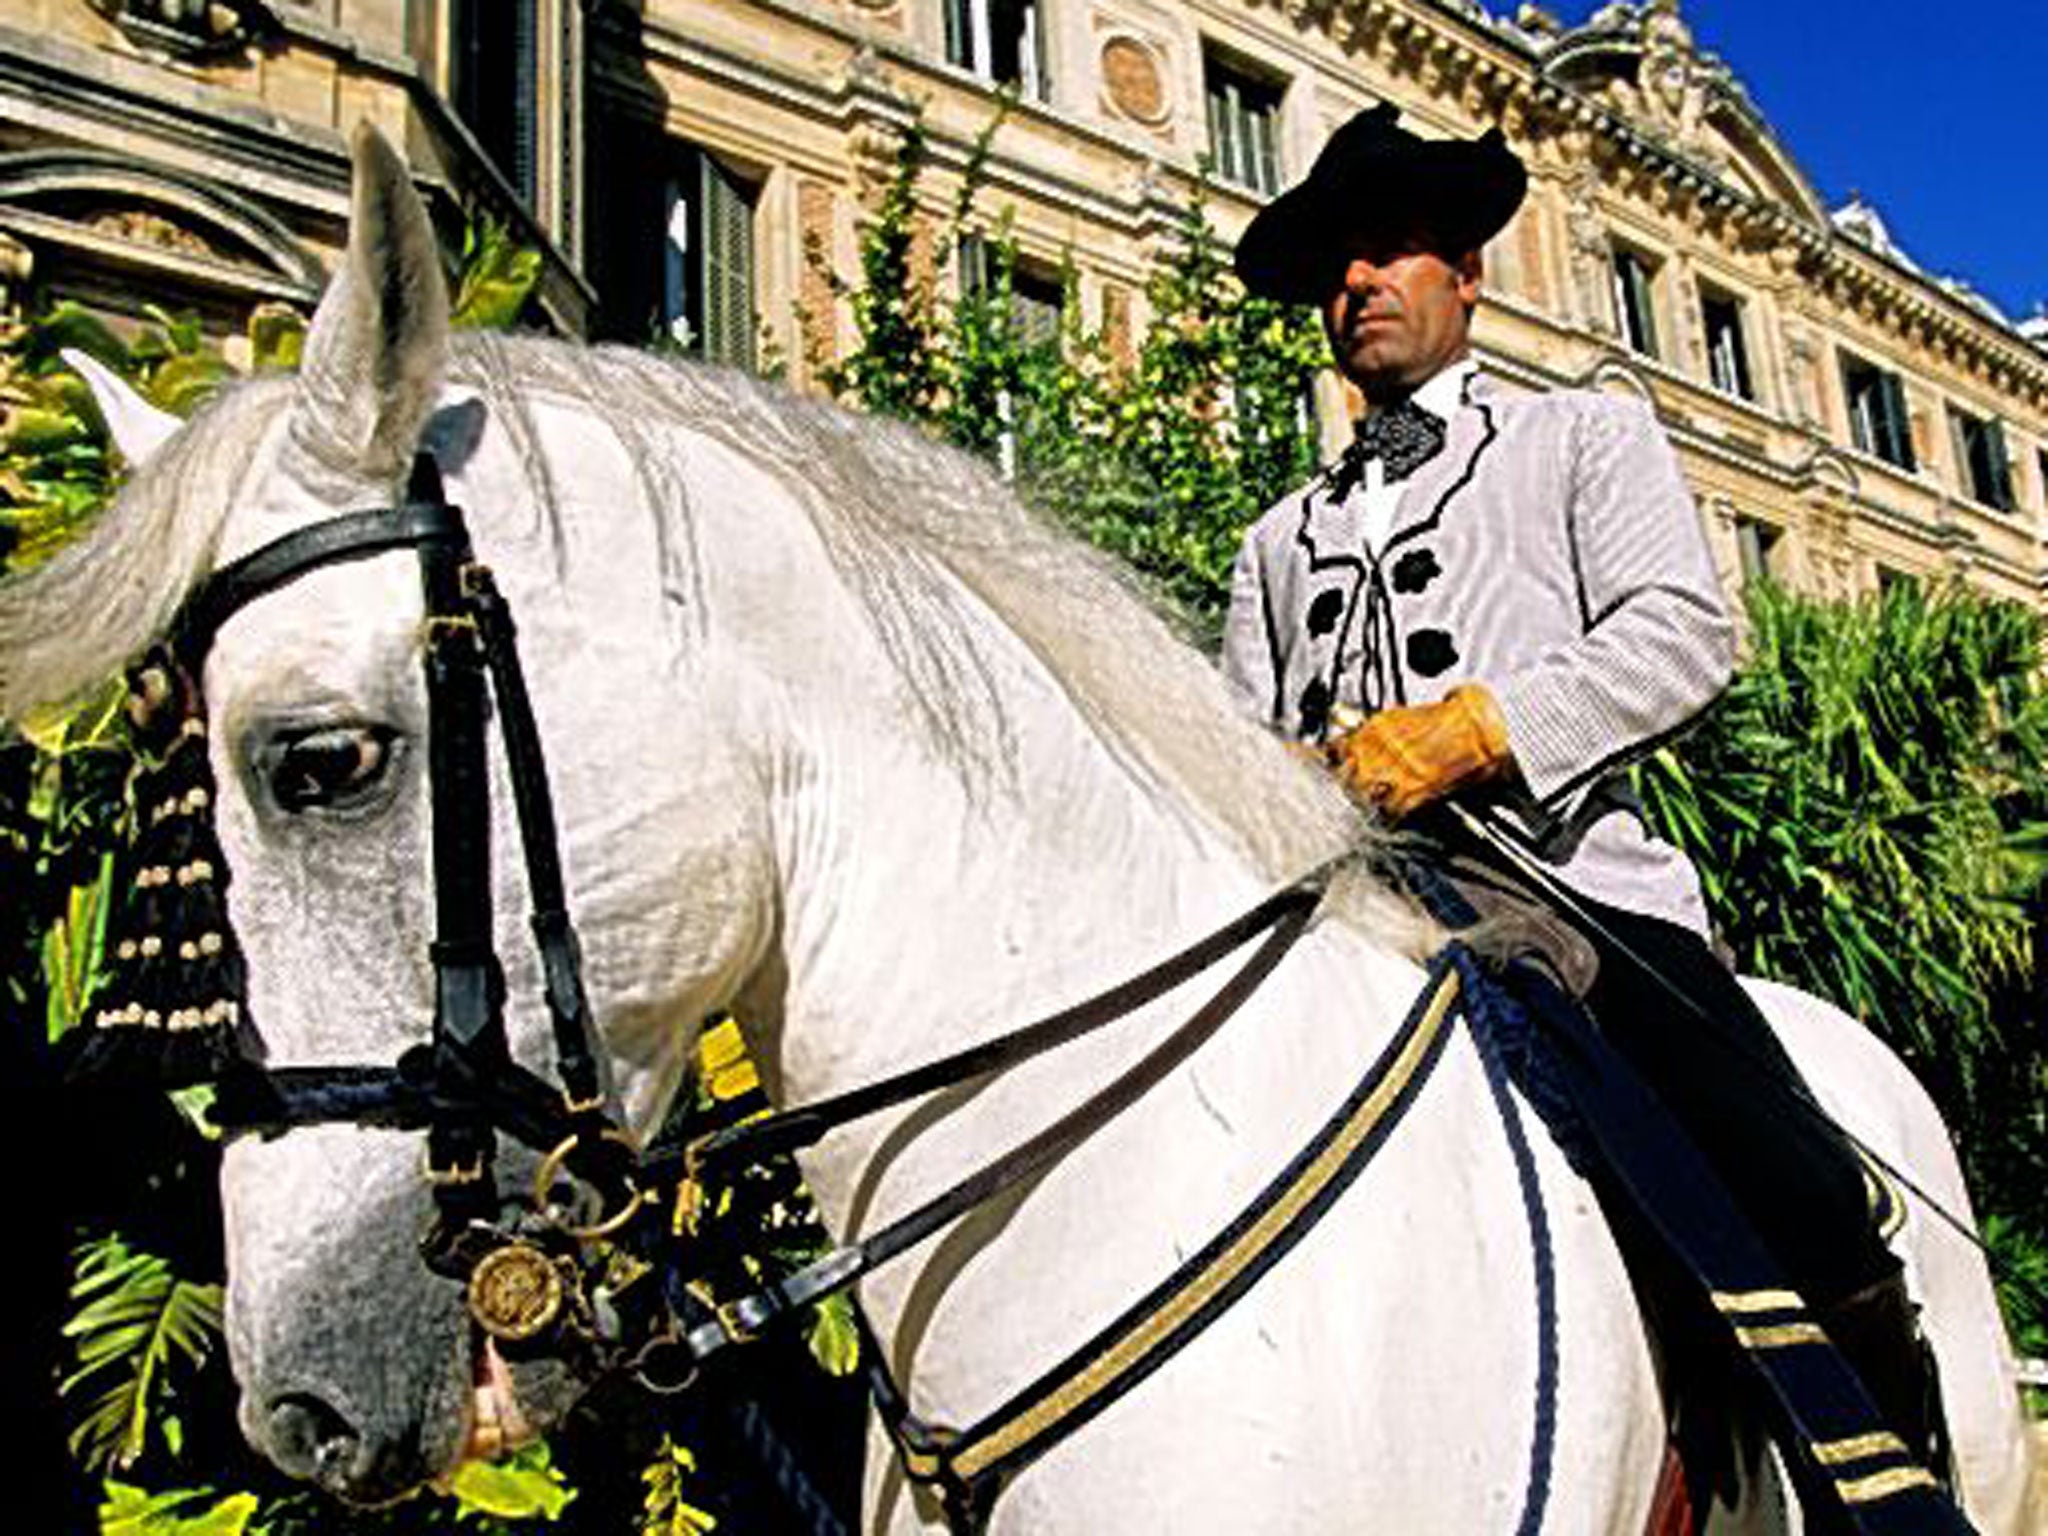 The Royal Andalusian School of Equestrian Art: bi-weekly shows by the dancing horses